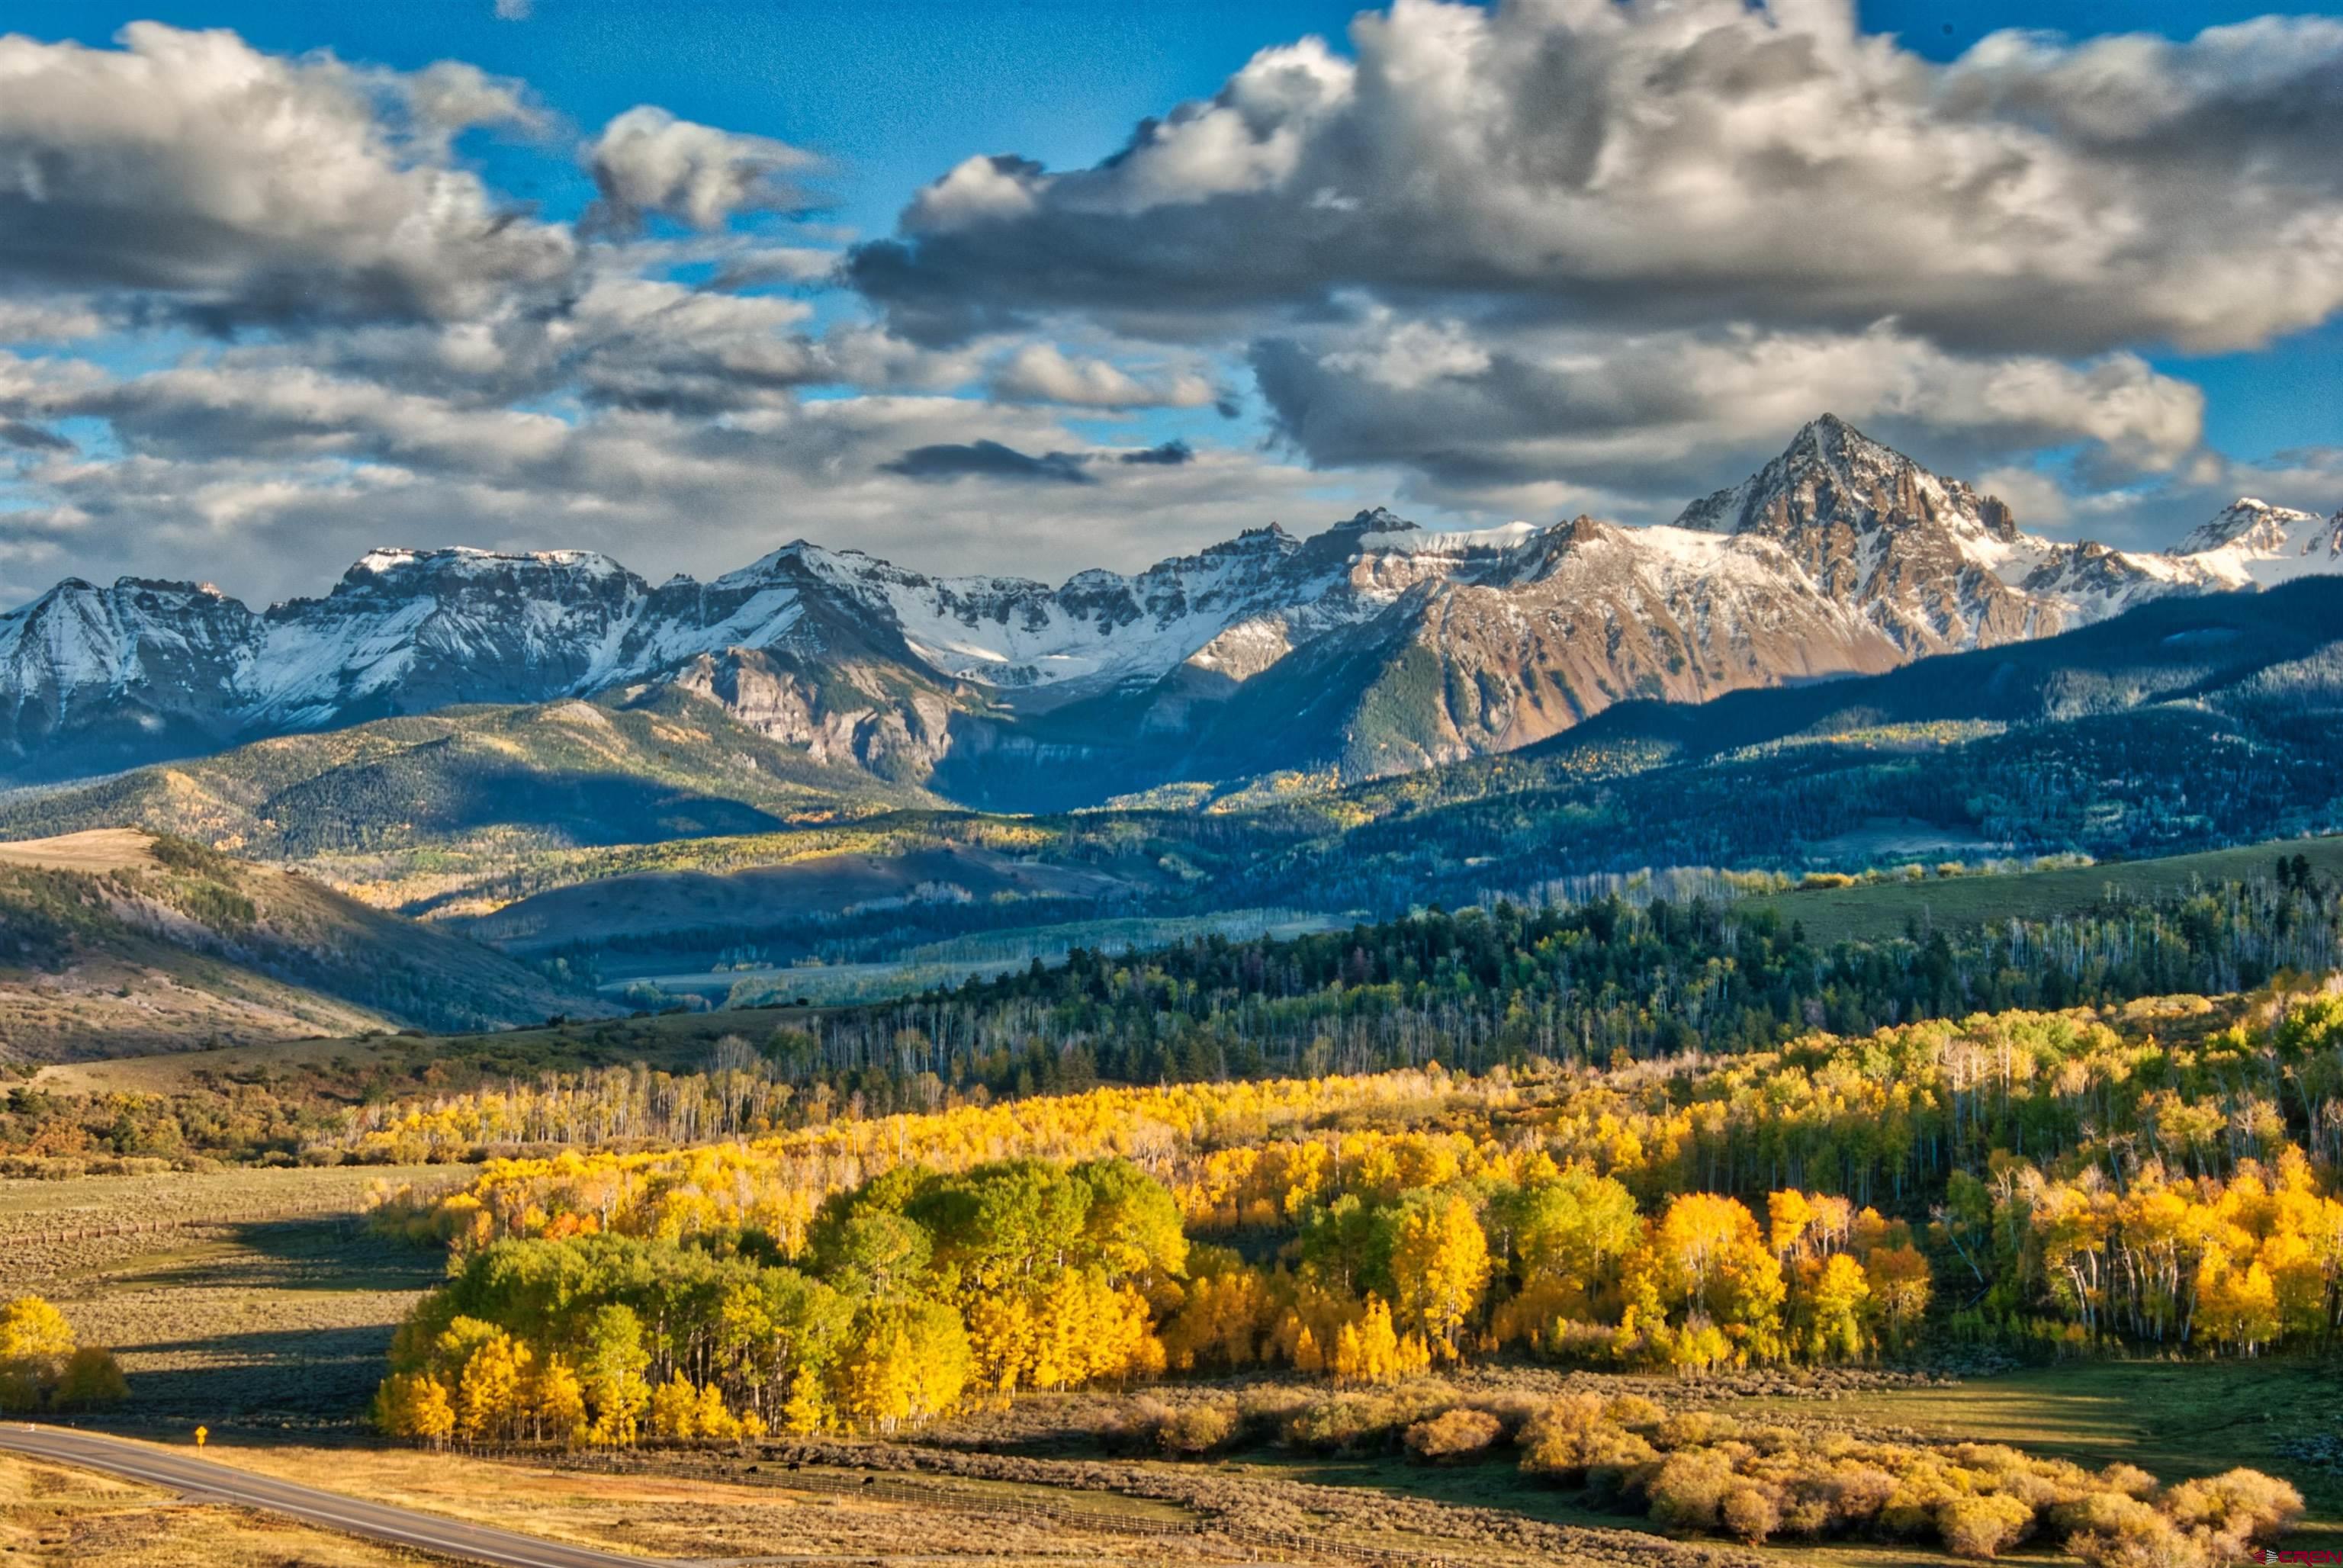 Looking for the ultimate in privacy, security and the best views on Colorado's Western Slope? Here it is! Located at the very top of the iconic Dallas Divide! Colorado Life magazine (September/October 2016) named Snow Drift Ranch on the Dallas Divide as the number one location in the entire State of Colorado to view Autumn colors. Secluded and very private yet has year round access along Colorado Hwy. 62. 15 minutes from Ridgeway and just 35 minutes from Telluride. The home was built in three phases and is truly an engineering marvel. On grid plus there is a total self sufficient of grid option.  This home has so many great features that it would take hours to explain everything. Breathtaking views, comfort and convenience in any event with accessible seclusion. It has everything! This gem could easily become a first class equine facility with ample acreage for barns, an arena and pasture. If hunting is what you desire Elk and Mule deer frequent the property and over the counter Elk tags can be bought annually. With the famous Double RL Ranch across Hwy. 62 allowing extremely limited elk hunting, this makes hunting on the Snow Drift Ranch extremely good. Skiers and golfers have the best of both Worlds! Telluride with it's World famous skiing, dining and shopping is just a short drive away and the Divide Golf club which offers memberships and is open to the public is minutes away from your front door! And of course Ridgeway being just fifteen minutes away has it's offerings, shopping, farmers market, festivals and Rodeos to entertain the whole family. The amazing home could accommodate a large family and guests or could serve as a corporate retreat/meeting facility.